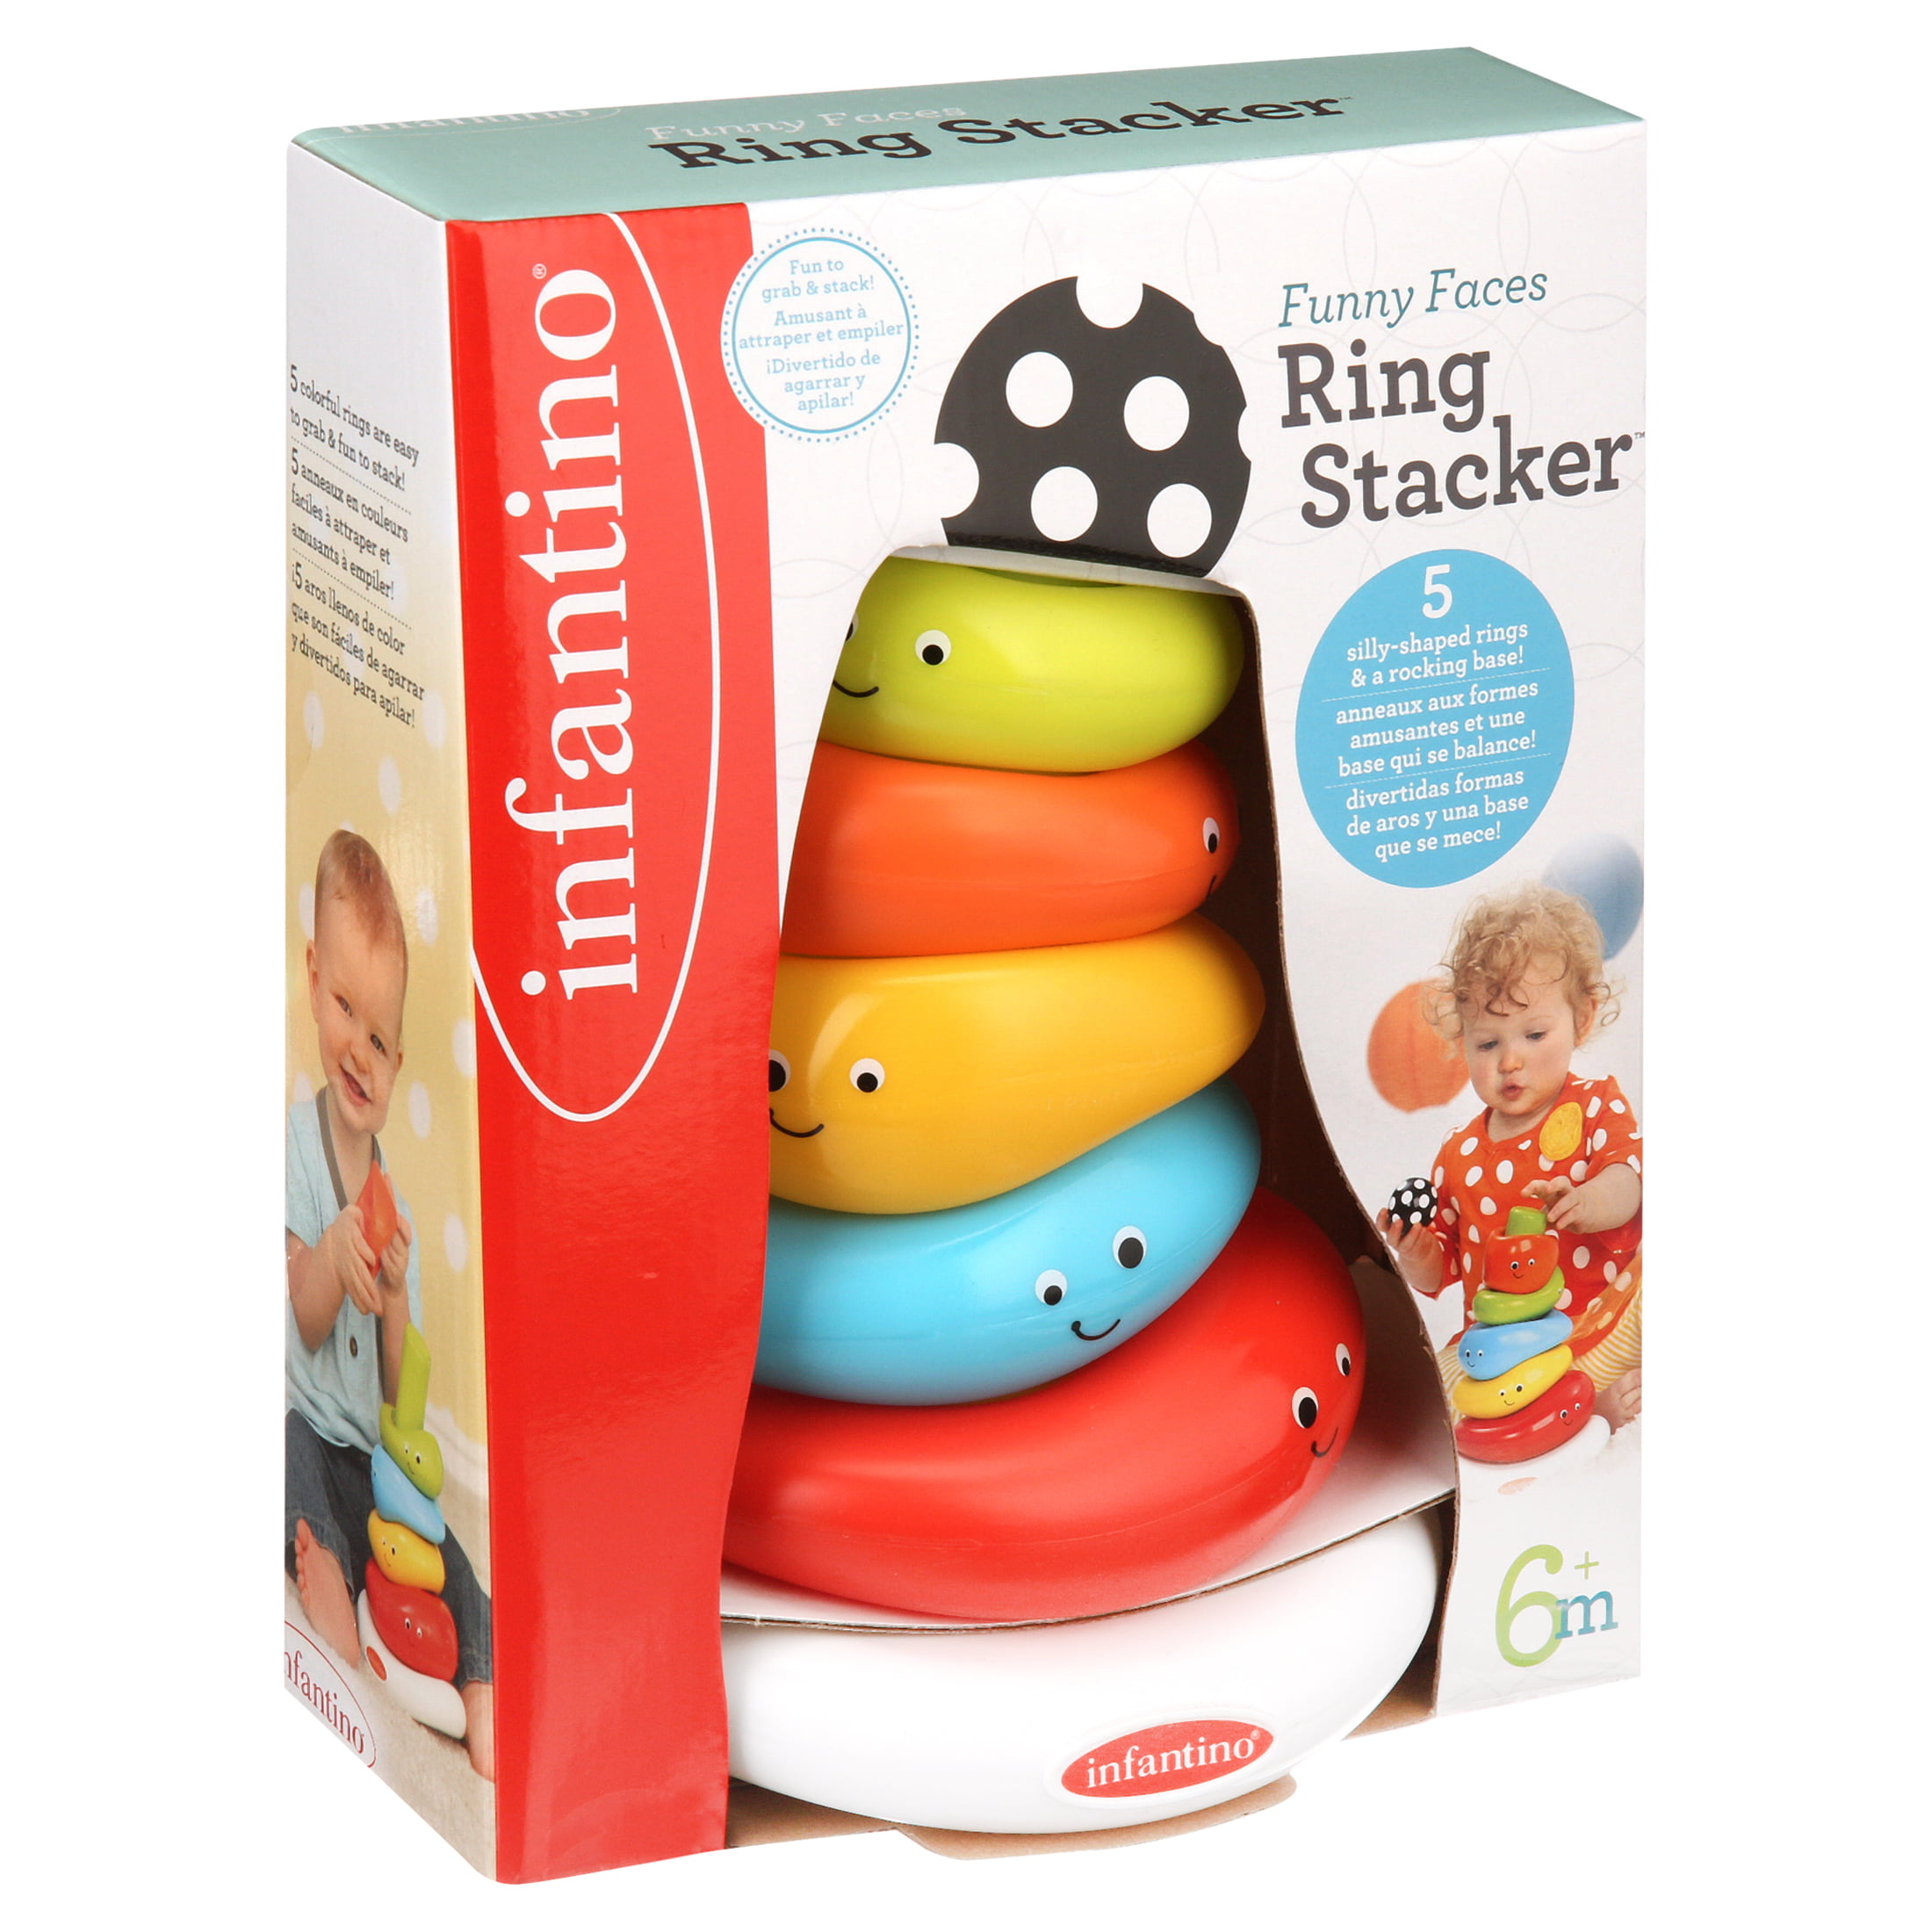 Funny Faces Infantino Ring Stacker 